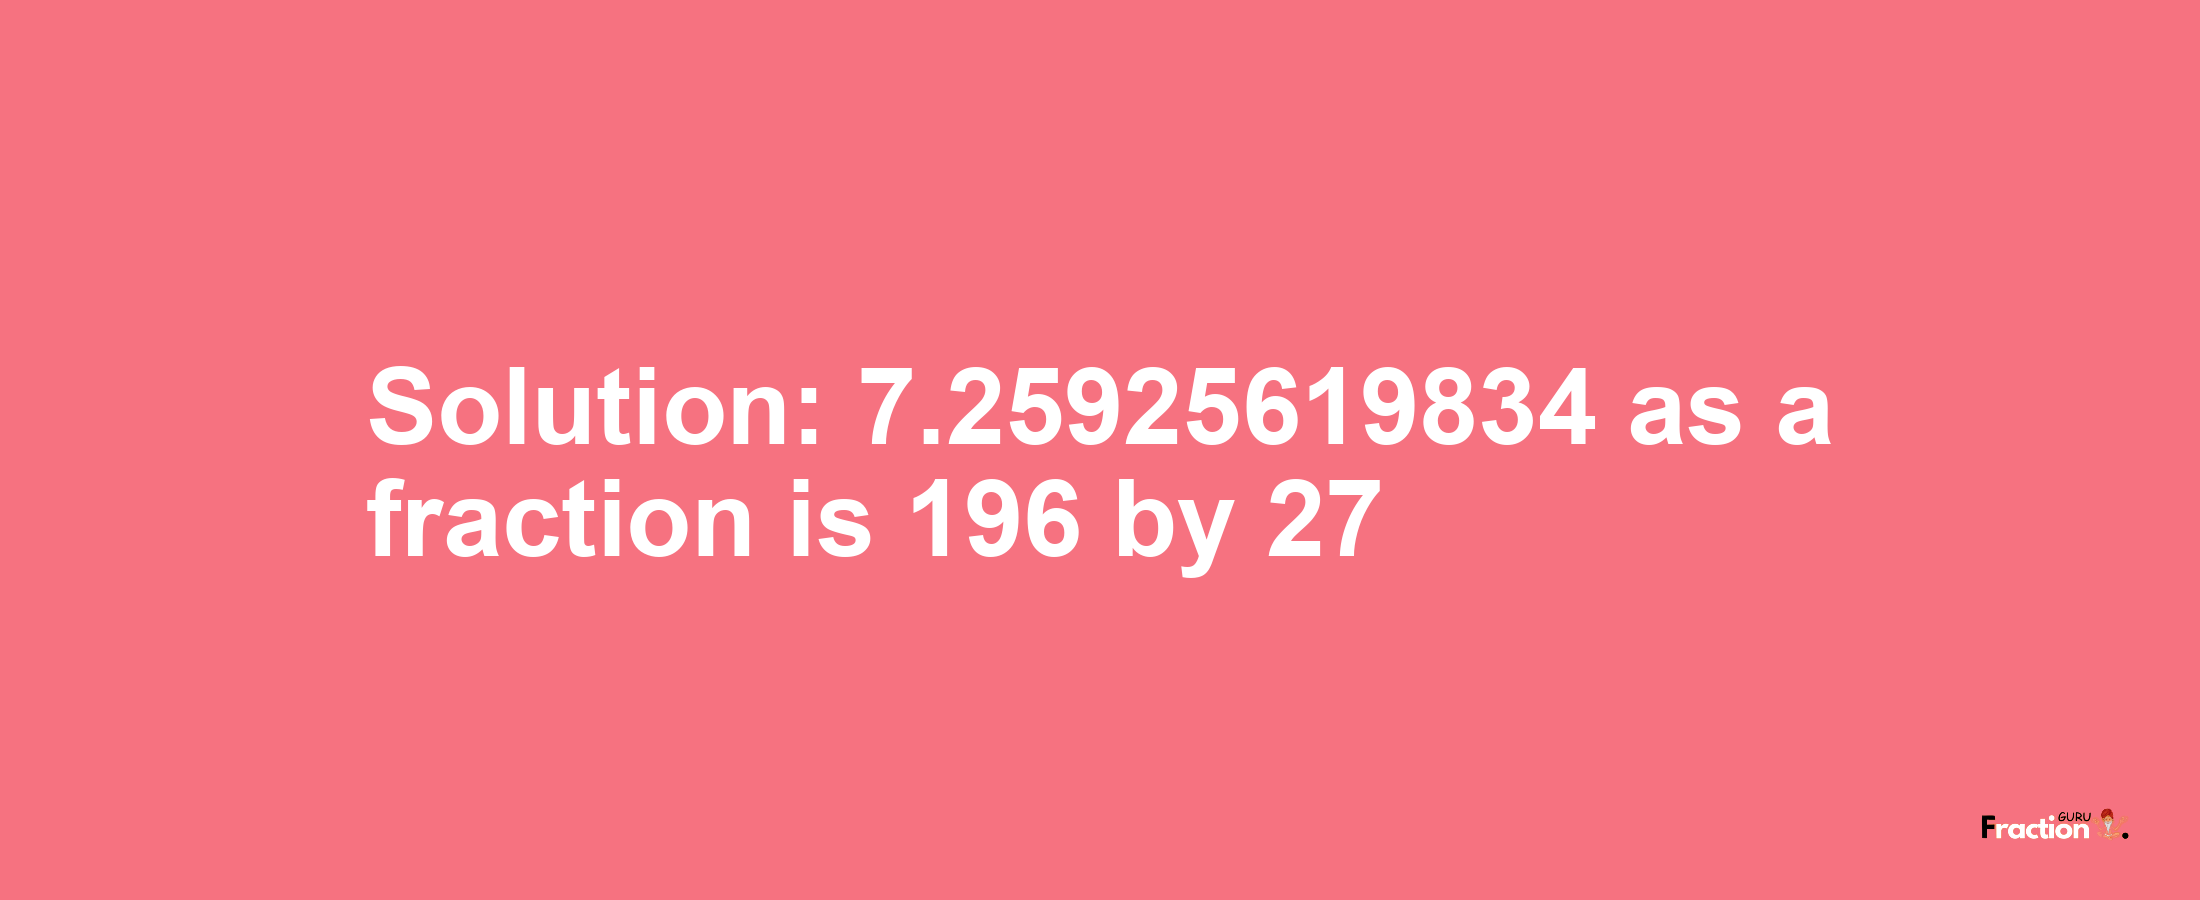 Solution:7.25925619834 as a fraction is 196/27